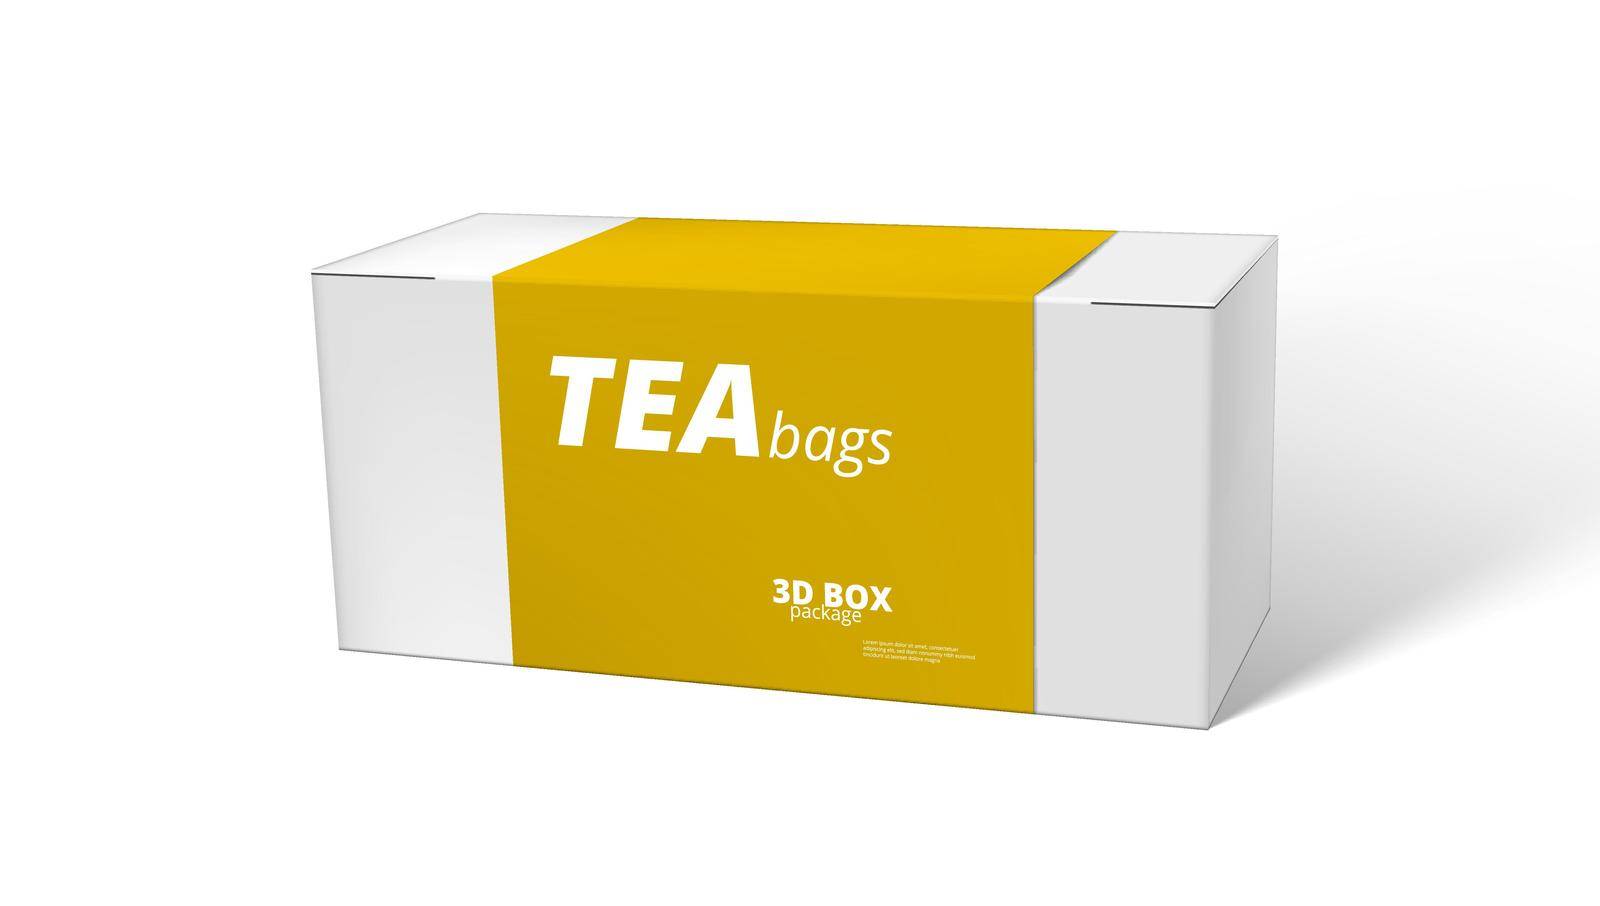 Clear White Box For Tea Bags With Yellow Label. EPS10 Vector